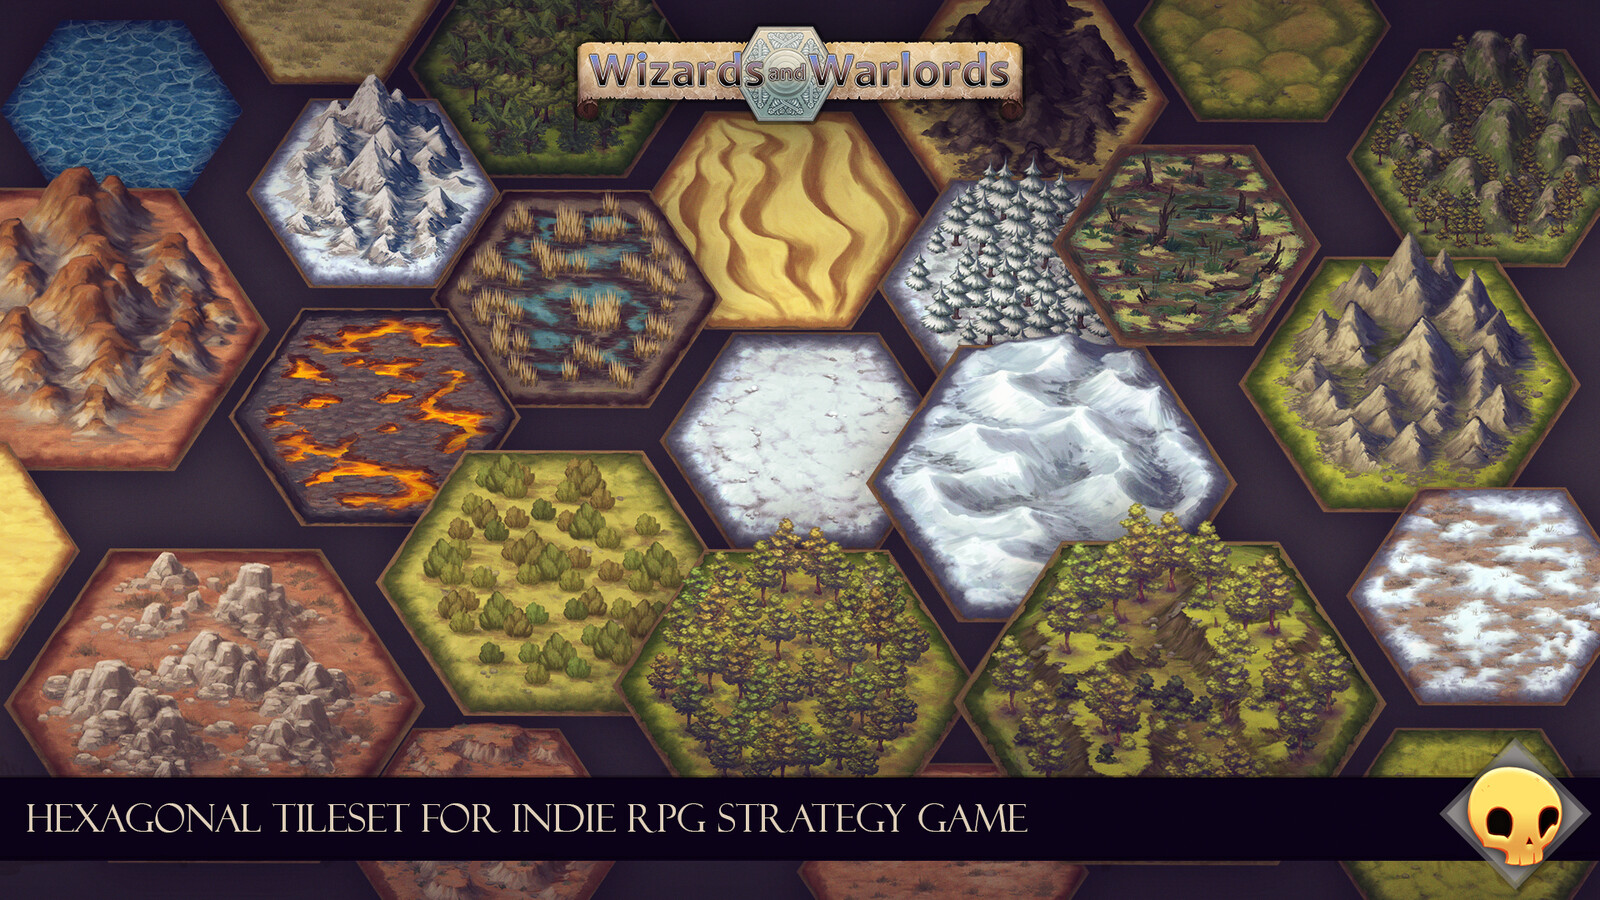 Overview of the tiles created for the tileset